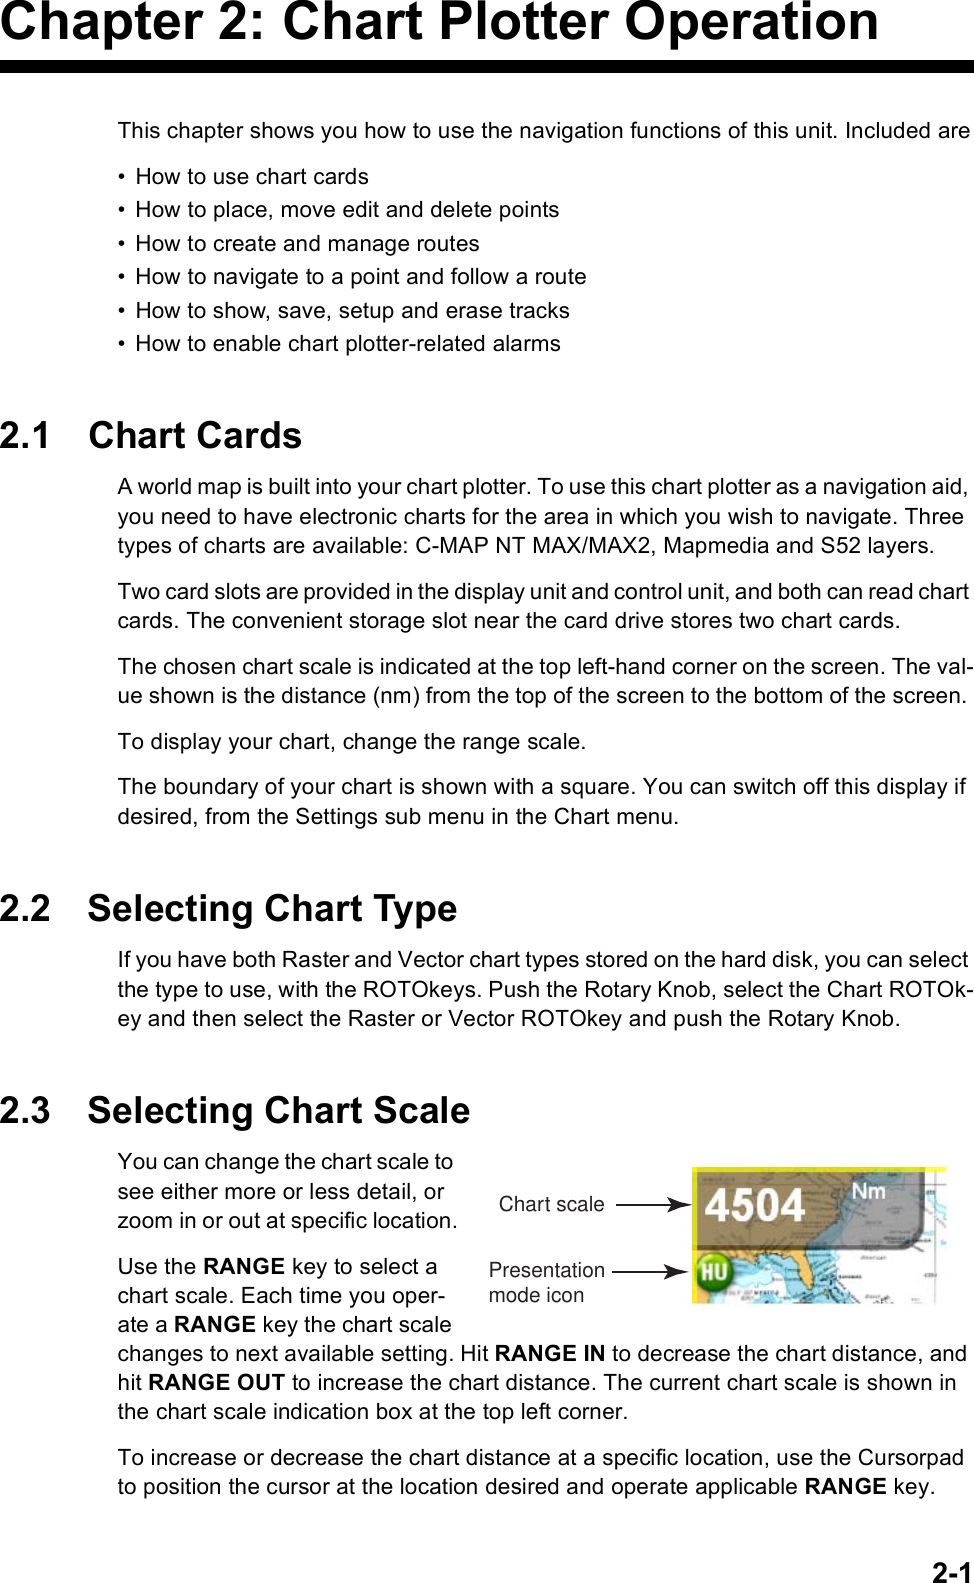 2-1Chapter 2: Chart Plotter OperationThis chapter shows you how to use the navigation functions of this unit. Included are• How to use chart cards• How to place, move edit and delete points• How to create and manage routes• How to navigate to a point and follow a route• How to show, save, setup and erase tracks• How to enable chart plotter-related alarms2.1 Chart CardsA world map is built into your chart plotter. To use this chart plotter as a navigation aid, you need to have electronic charts for the area in which you wish to navigate. Three types of charts are available: C-MAP NT MAX/MAX2, Mapmedia and S52 layers. Two card slots are provided in the display unit and control unit, and both can read chart cards. The convenient storage slot near the card drive stores two chart cards. The chosen chart scale is indicated at the top left-hand corner on the screen. The val-ue shown is the distance (nm) from the top of the screen to the bottom of the screen. To display your chart, change the range scale.The boundary of your chart is shown with a square. You can switch off this display if desired, from the Settings sub menu in the Chart menu.2.2 Selecting Chart TypeIf you have both Raster and Vector chart types stored on the hard disk, you can select the type to use, with the ROTOkeys. Push the Rotary Knob, select the Chart ROTOk-ey and then select the Raster or Vector ROTOkey and push the Rotary Knob.2.3 Selecting Chart ScaleYou can change the chart scale to see either more or less detail, or zoom in or out at specific location.Use the RANGE key to select a chart scale. Each time you oper-ate a RANGE key the chart scale changes to next available setting. Hit RANGE IN to decrease the chart distance, and hit RANGE OUT to increase the chart distance. The current chart scale is shown in the chart scale indication box at the top left corner.To increase or decrease the chart distance at a specific location, use the Cursorpad to position the cursor at the location desired and operate applicable RANGE key. Chart scalePresentationmode icon